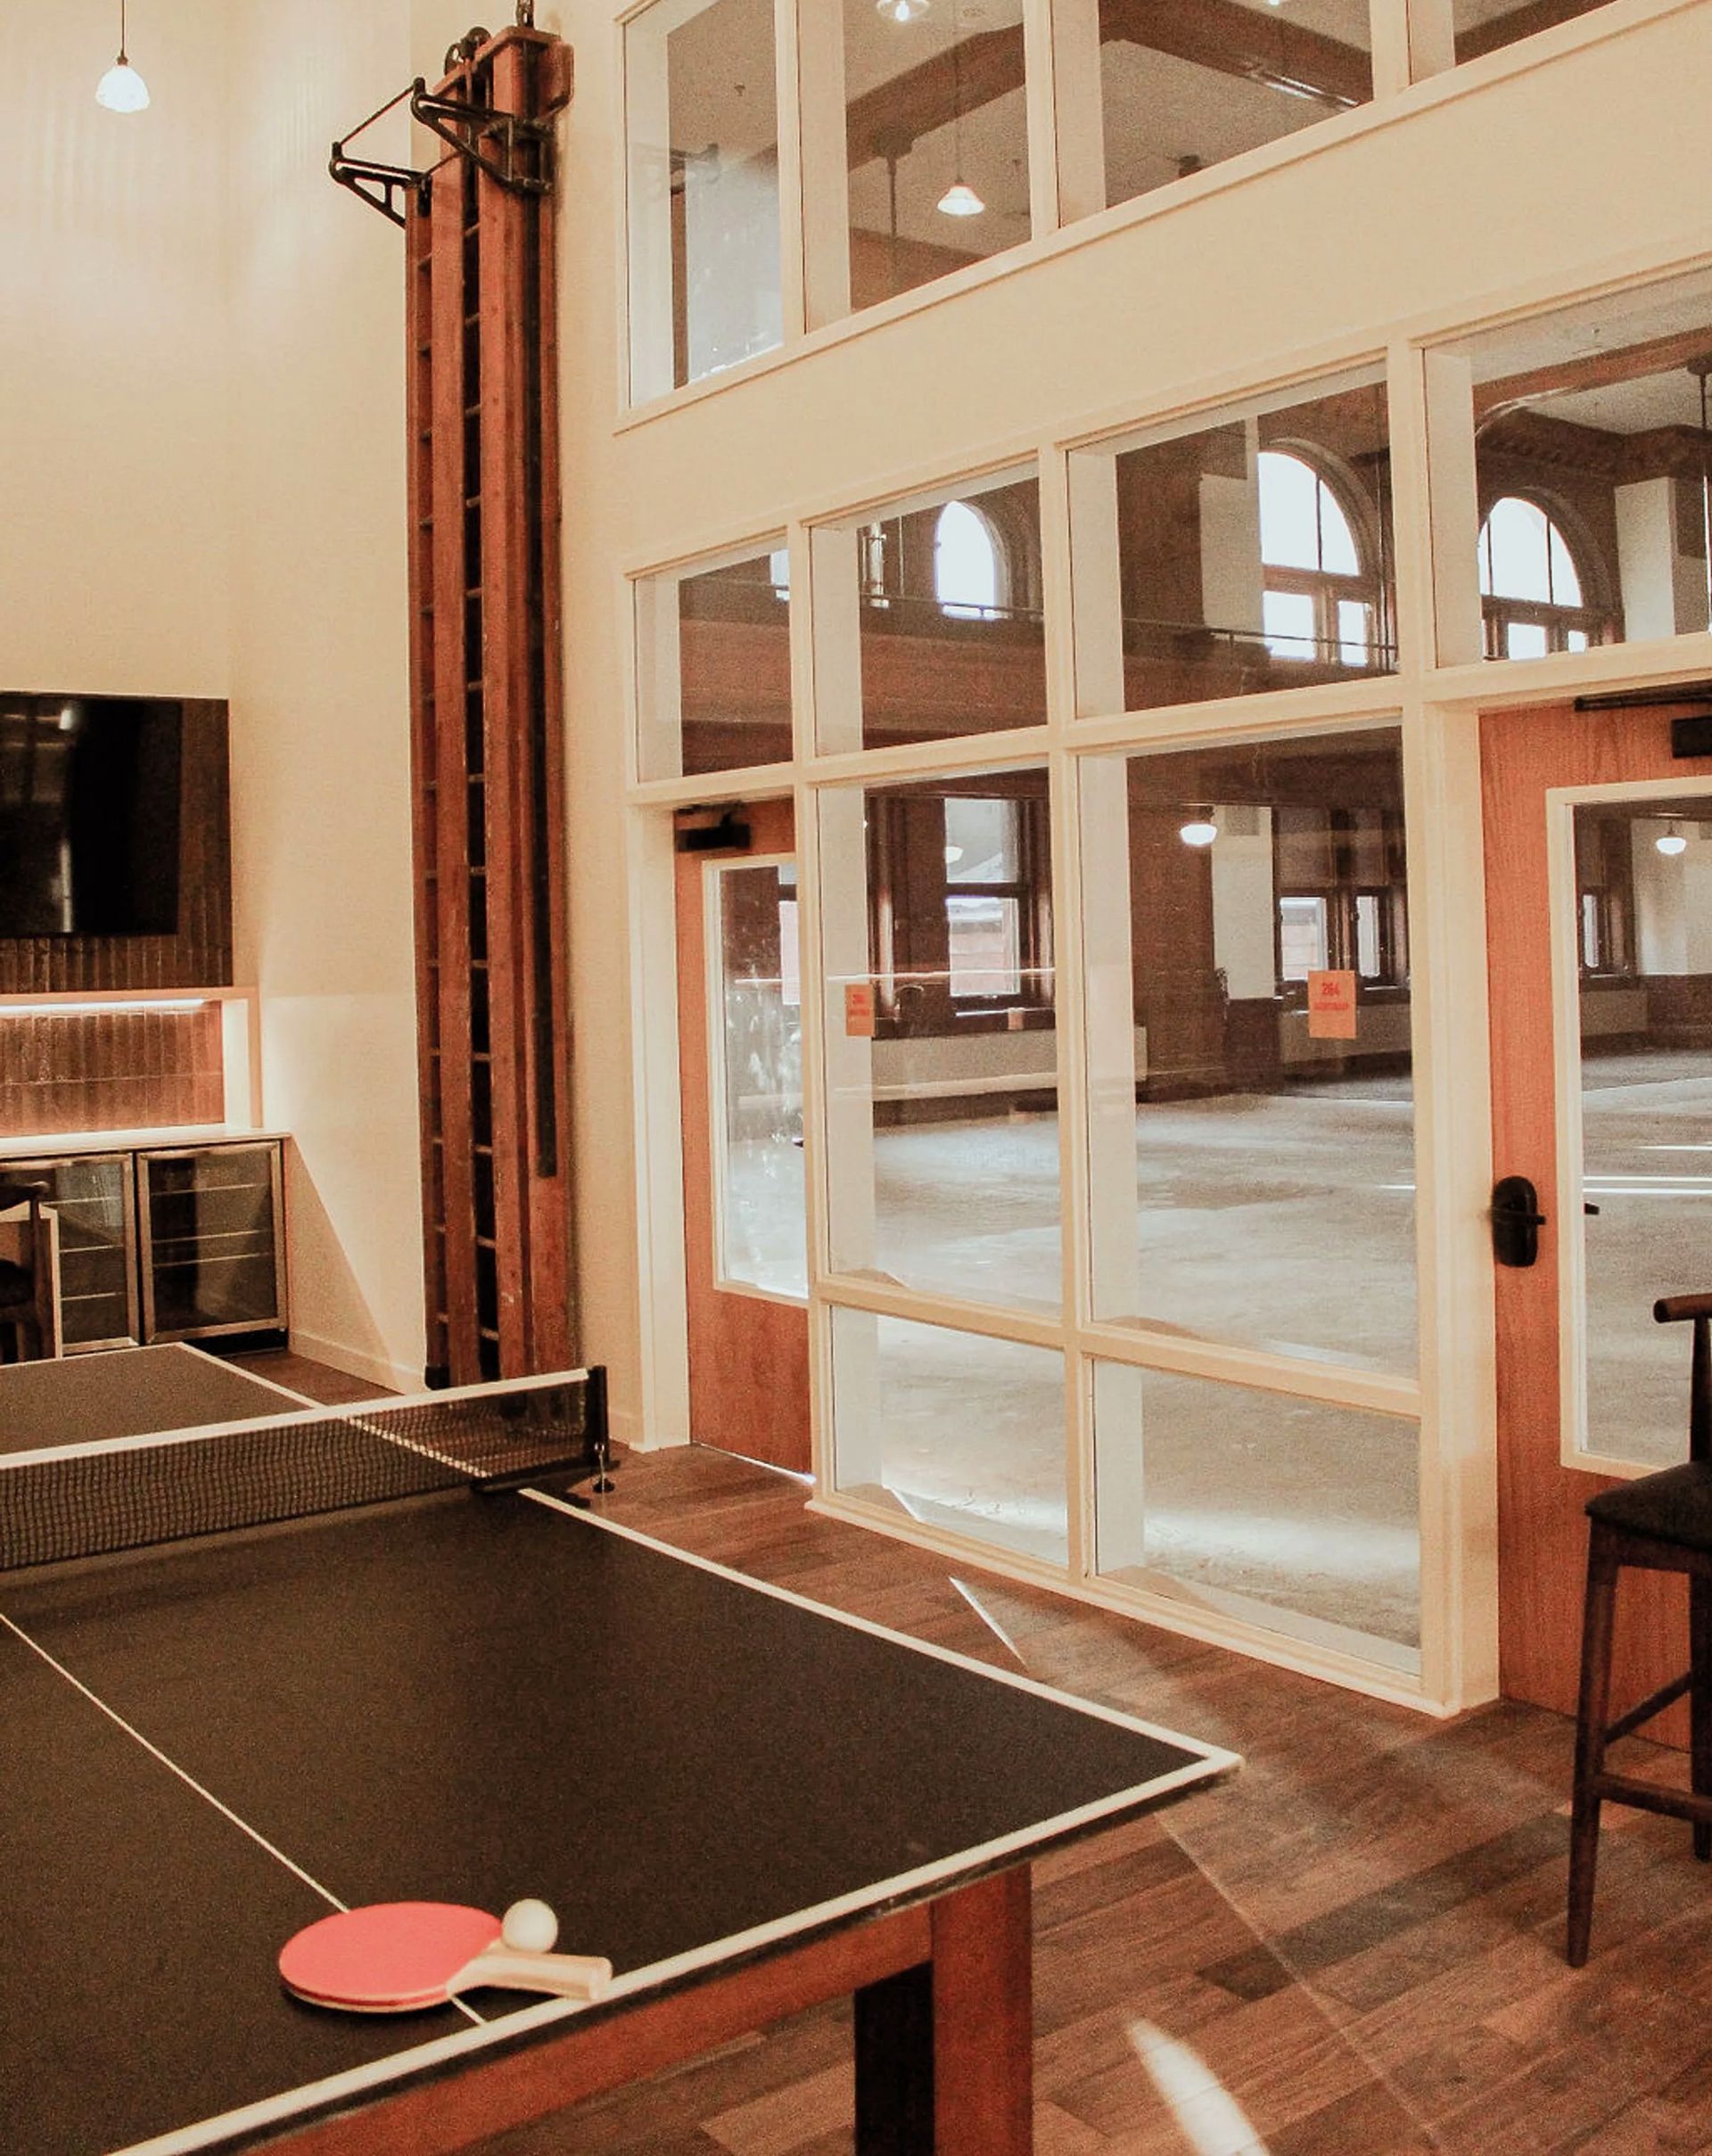 A ping pong table in a room with lots of windows